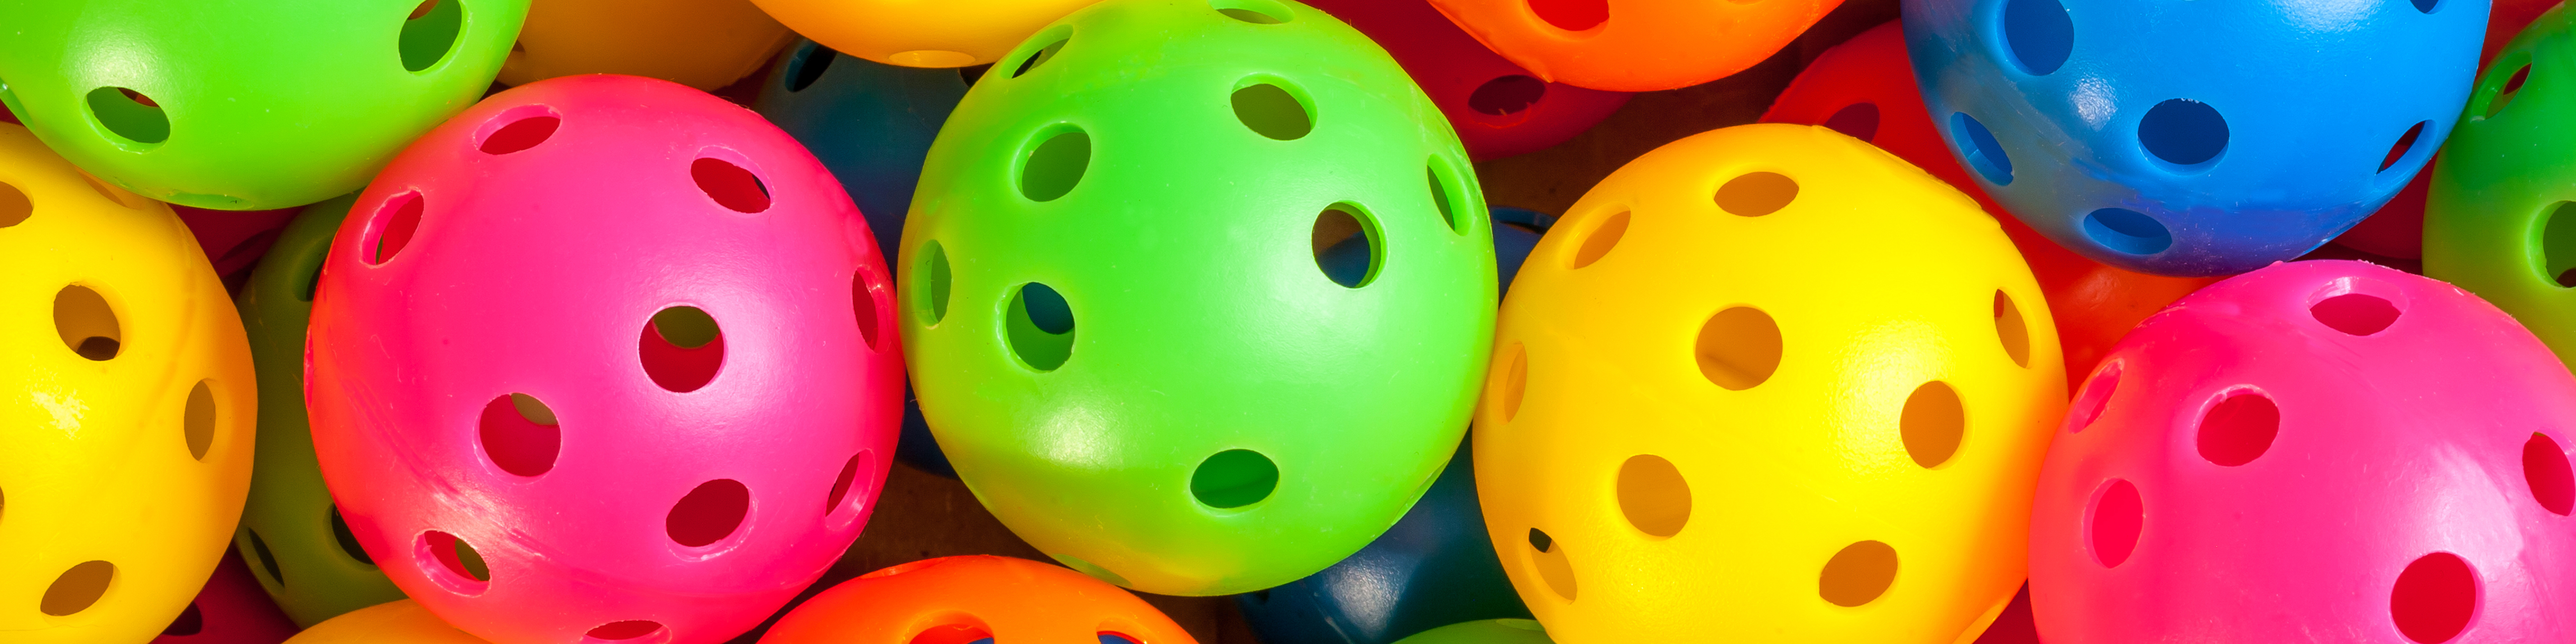 Photo of a bunch of pickleballs in blue, yellow, green, pink, and orange